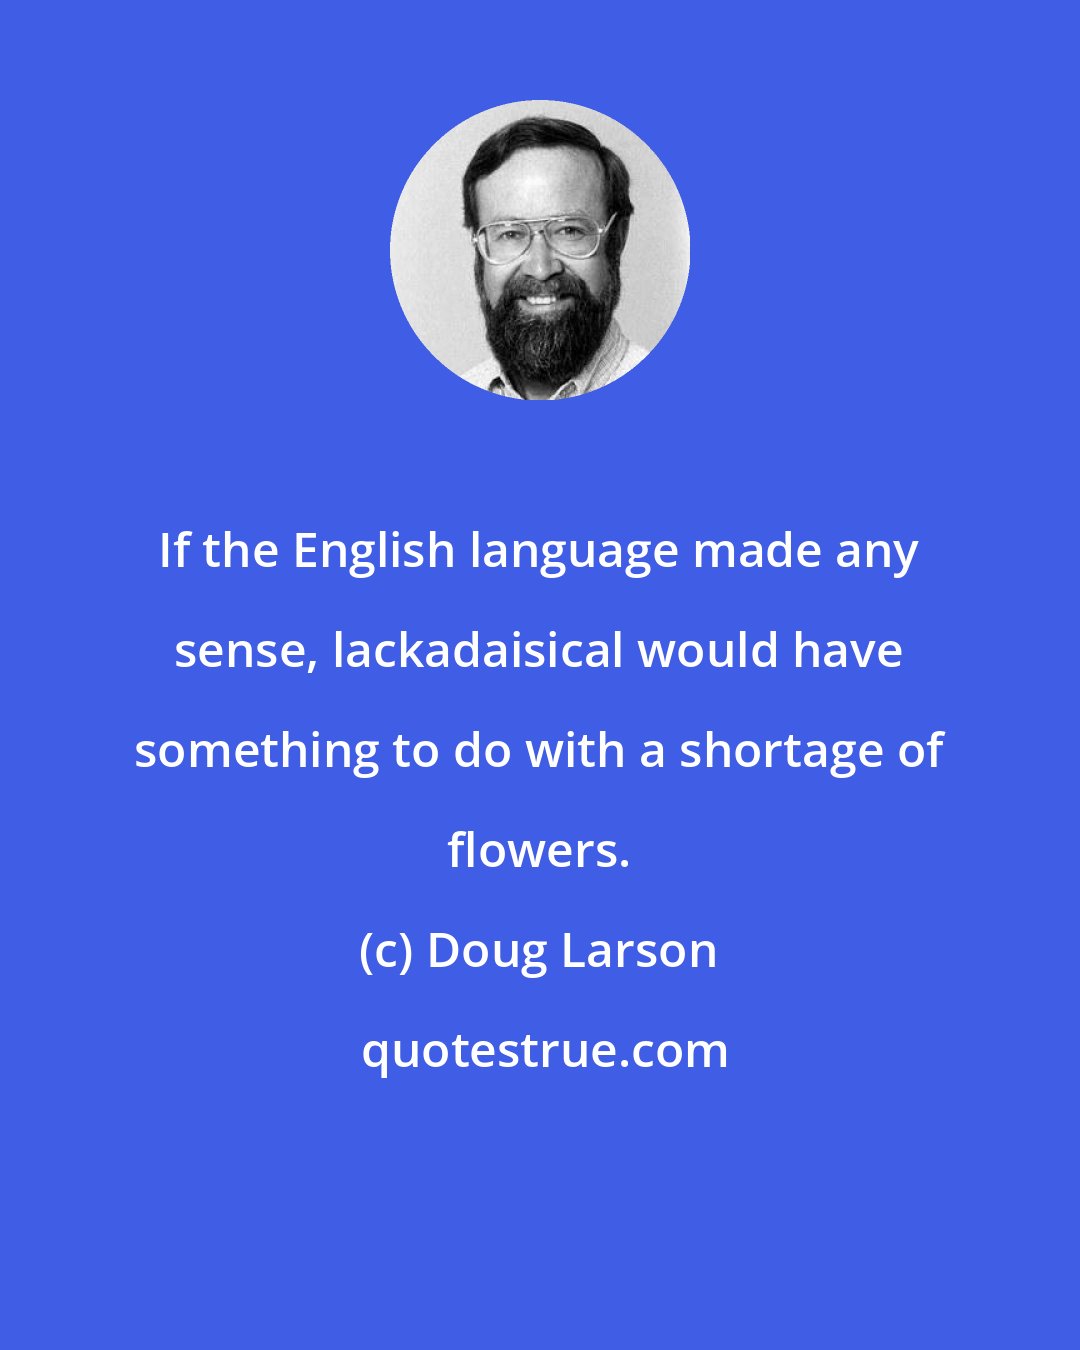 Doug Larson: If the English language made any sense, lackadaisical would have something to do with a shortage of flowers.